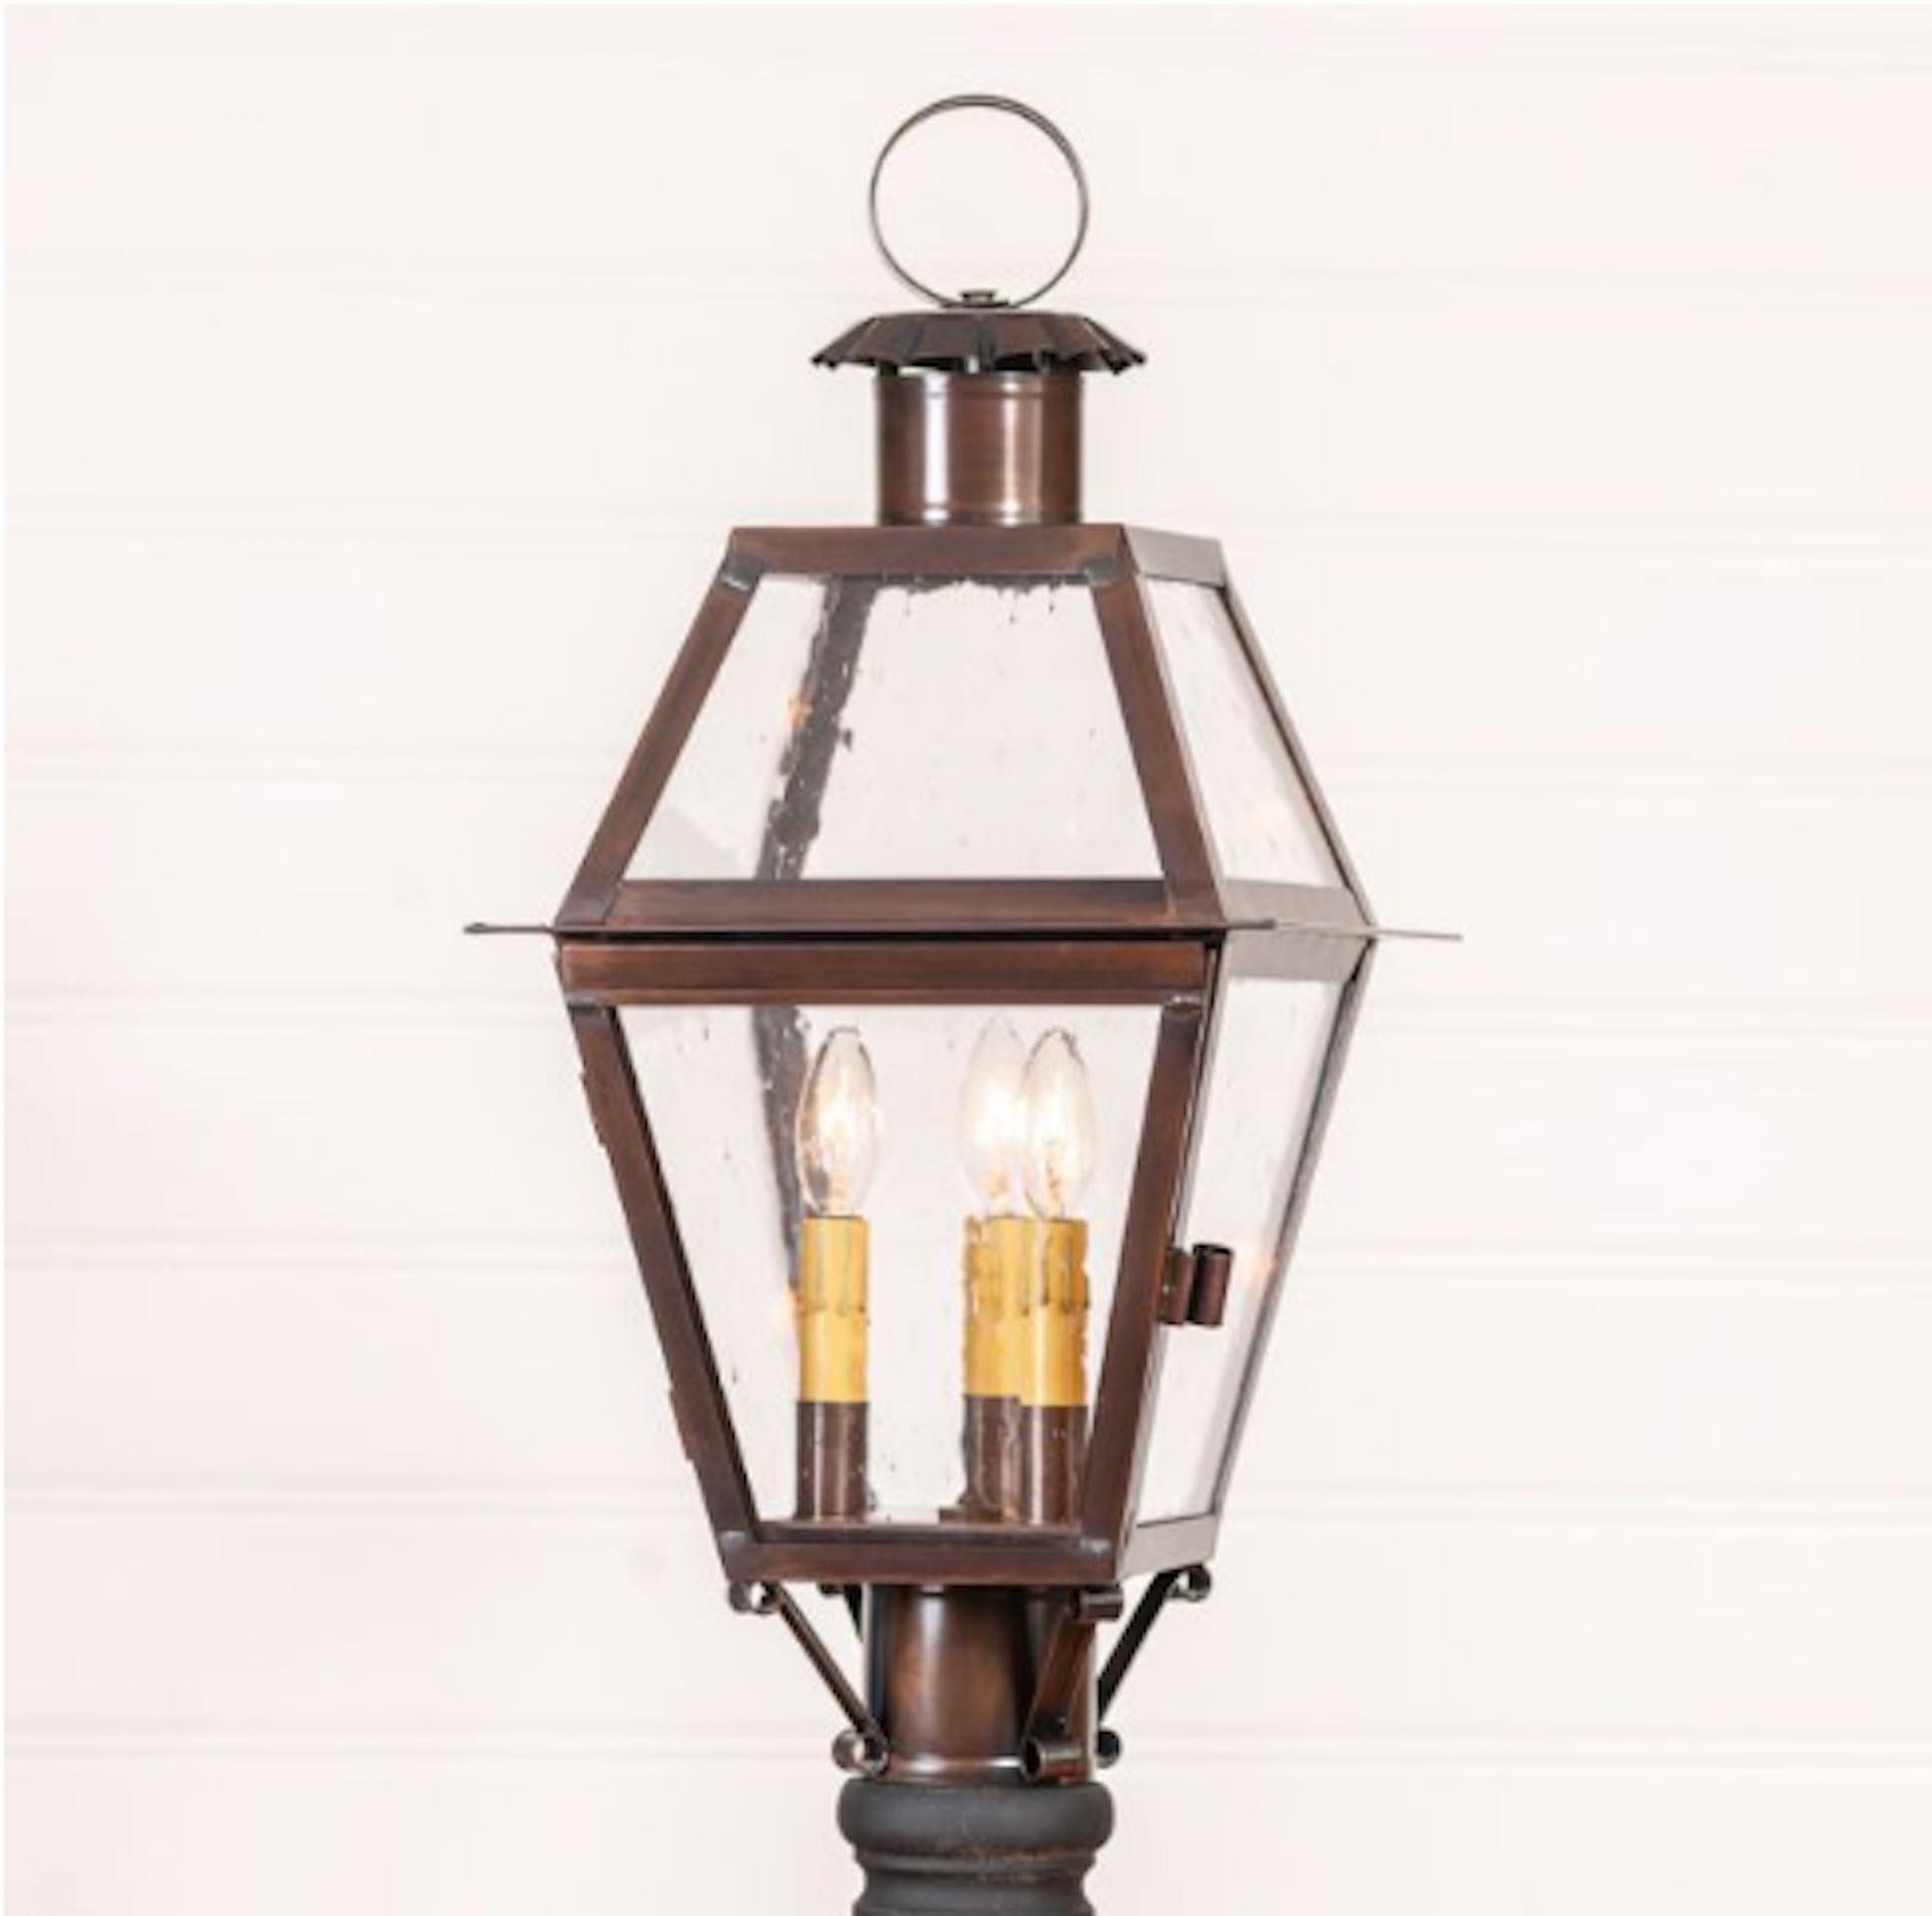 Vintage | Colonial Revival | Small Post Lantern